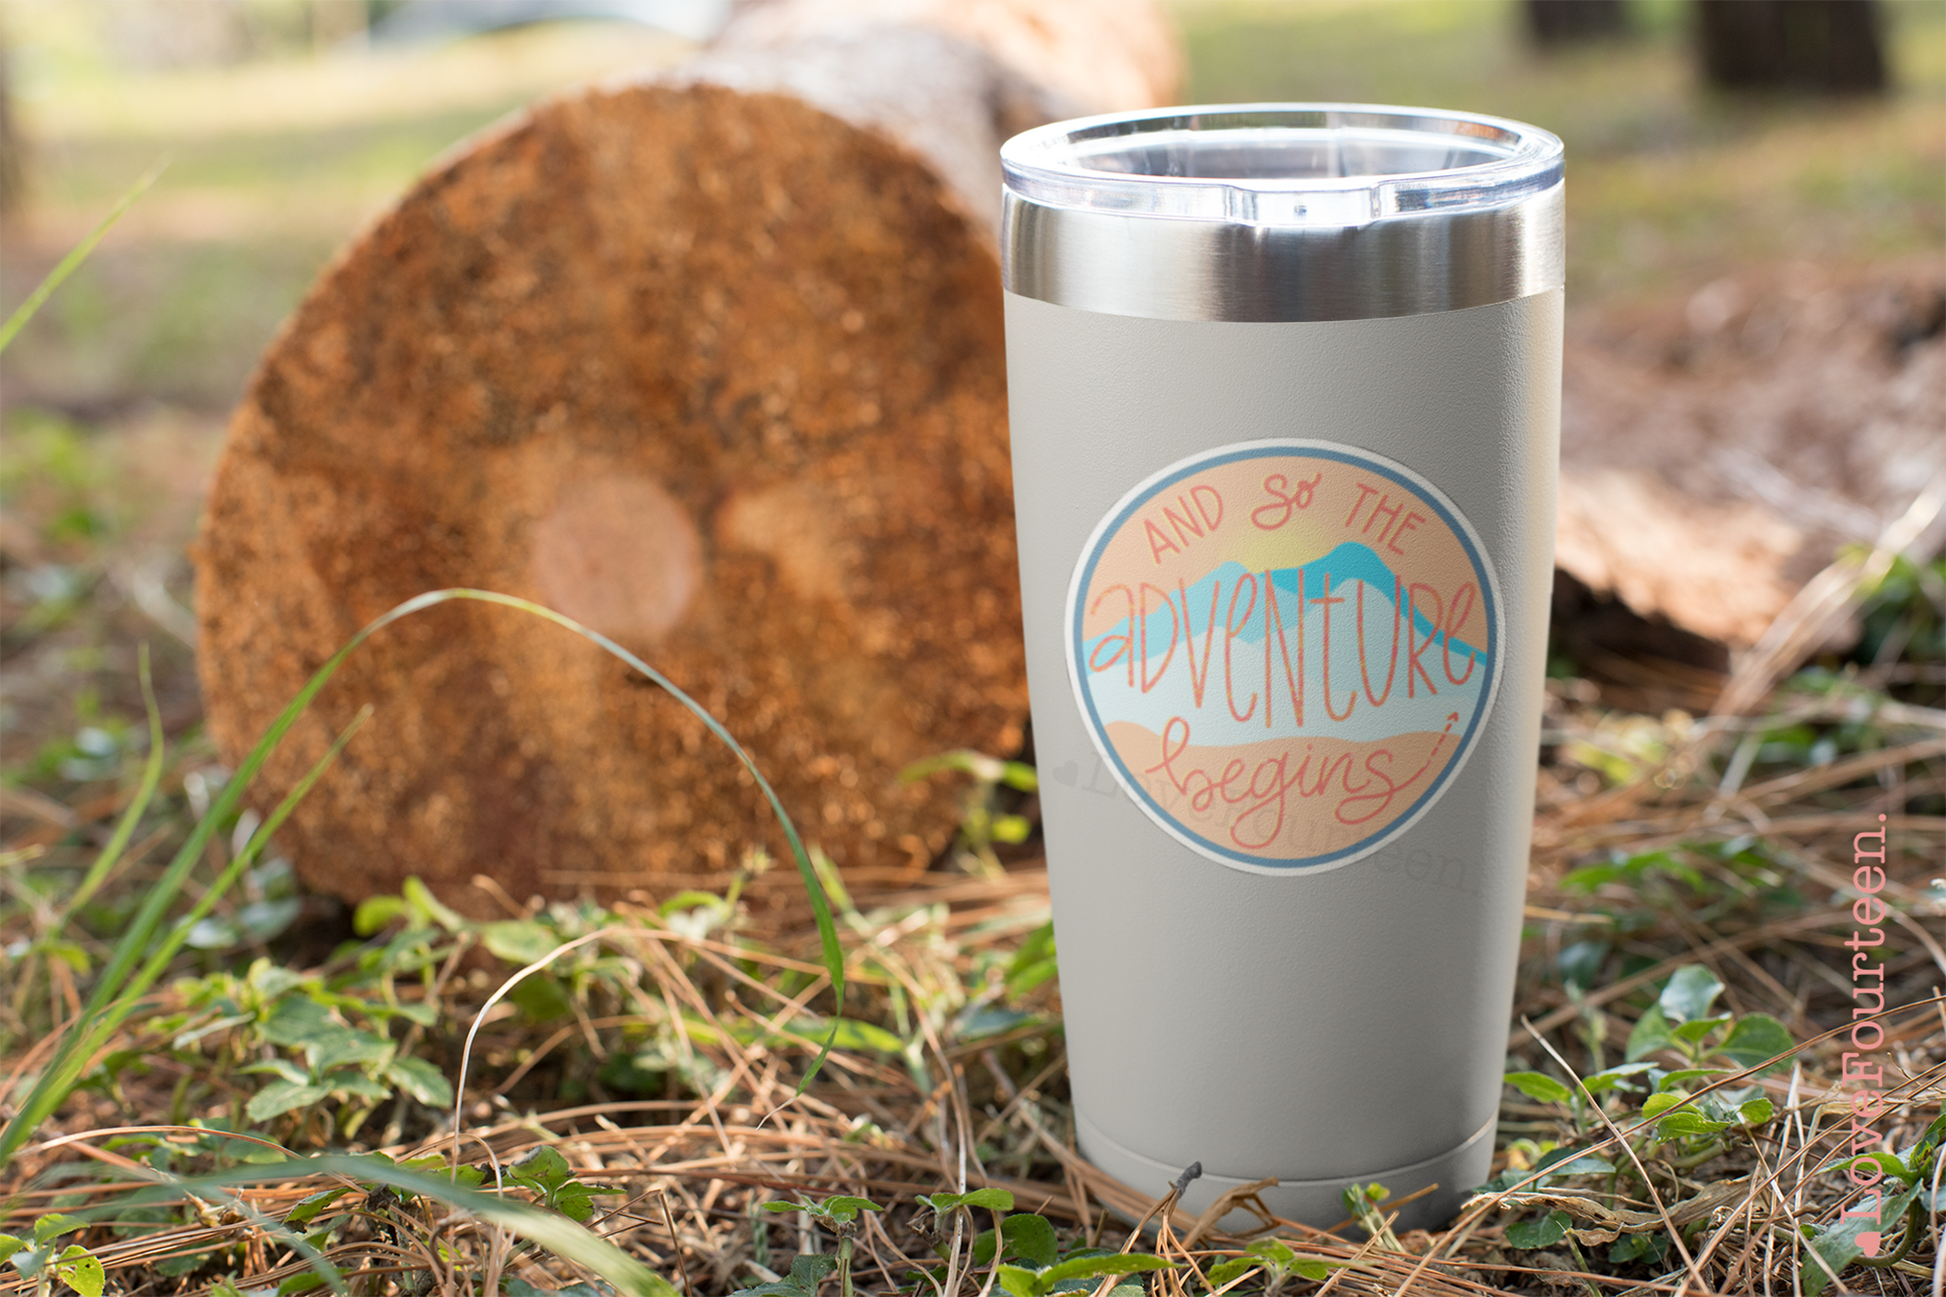 Tumbler on the ground with a waterproof die cut sticker saying "and so the adventure begins"